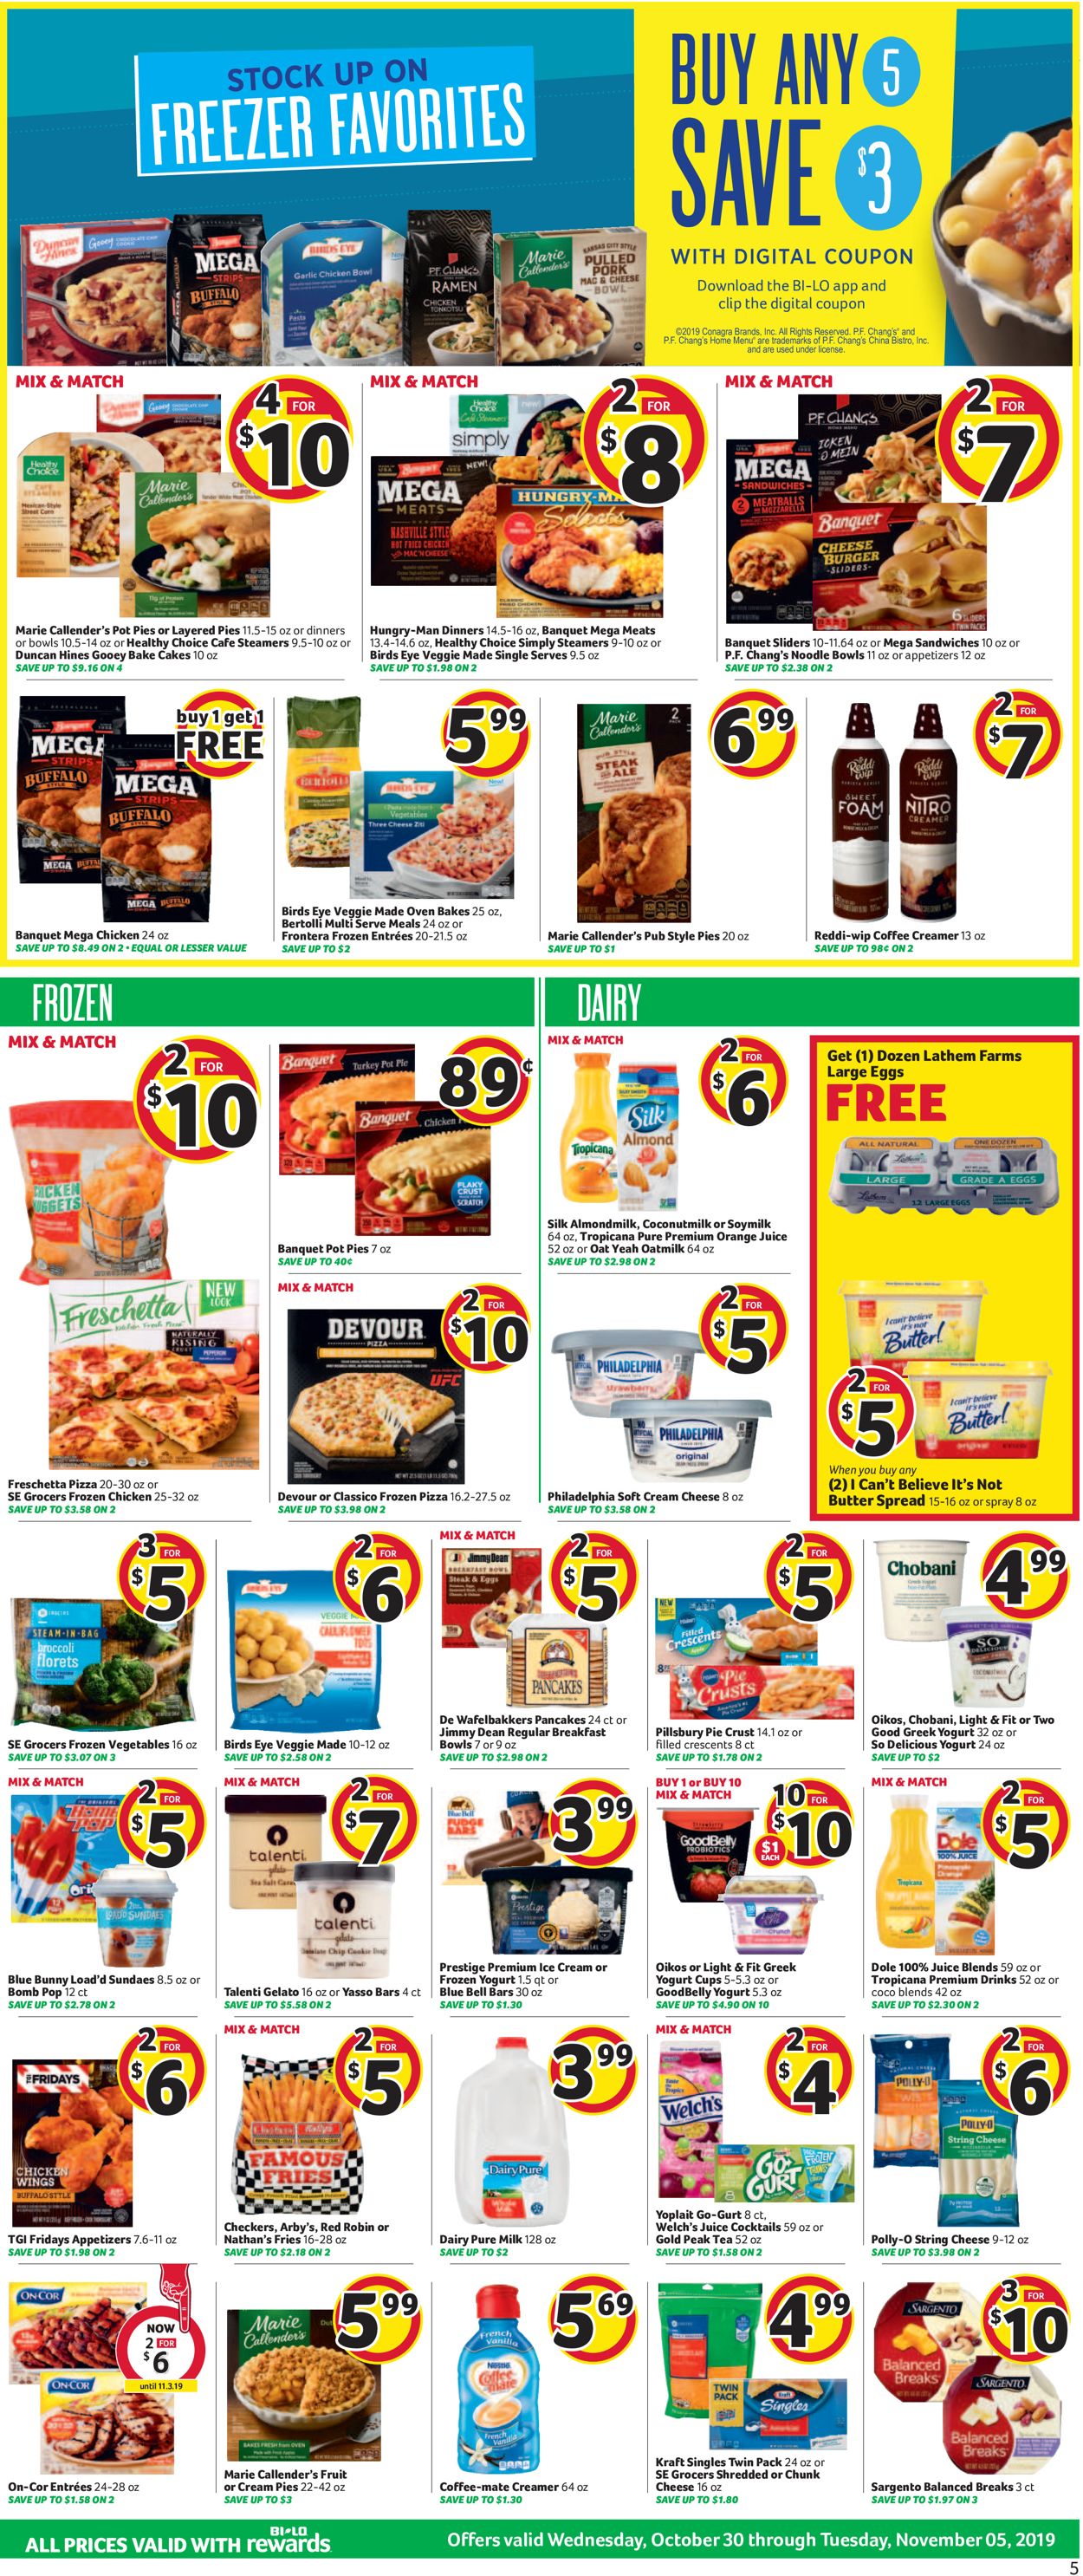 BI-LO Current weekly ad 10/30 - 11/05/2019 5 - frequent ...